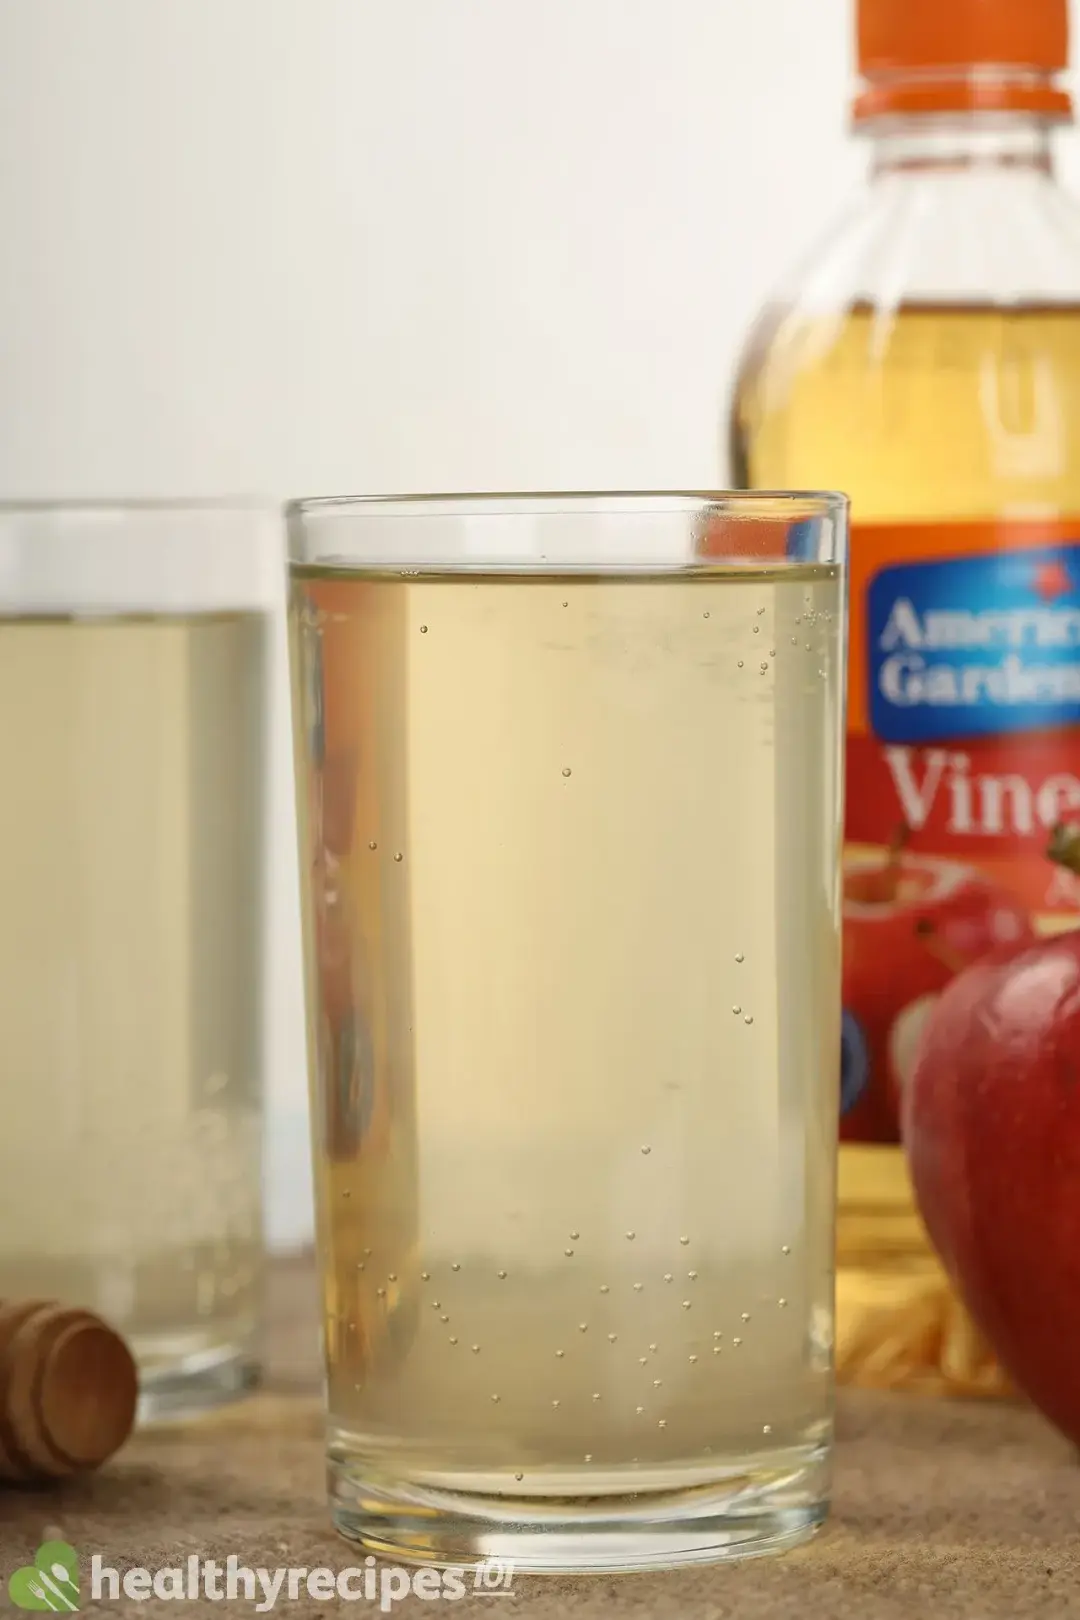 Two tall glasses full of diluted apple cider vinegar and soda, next to a vinegar bottle and an apple